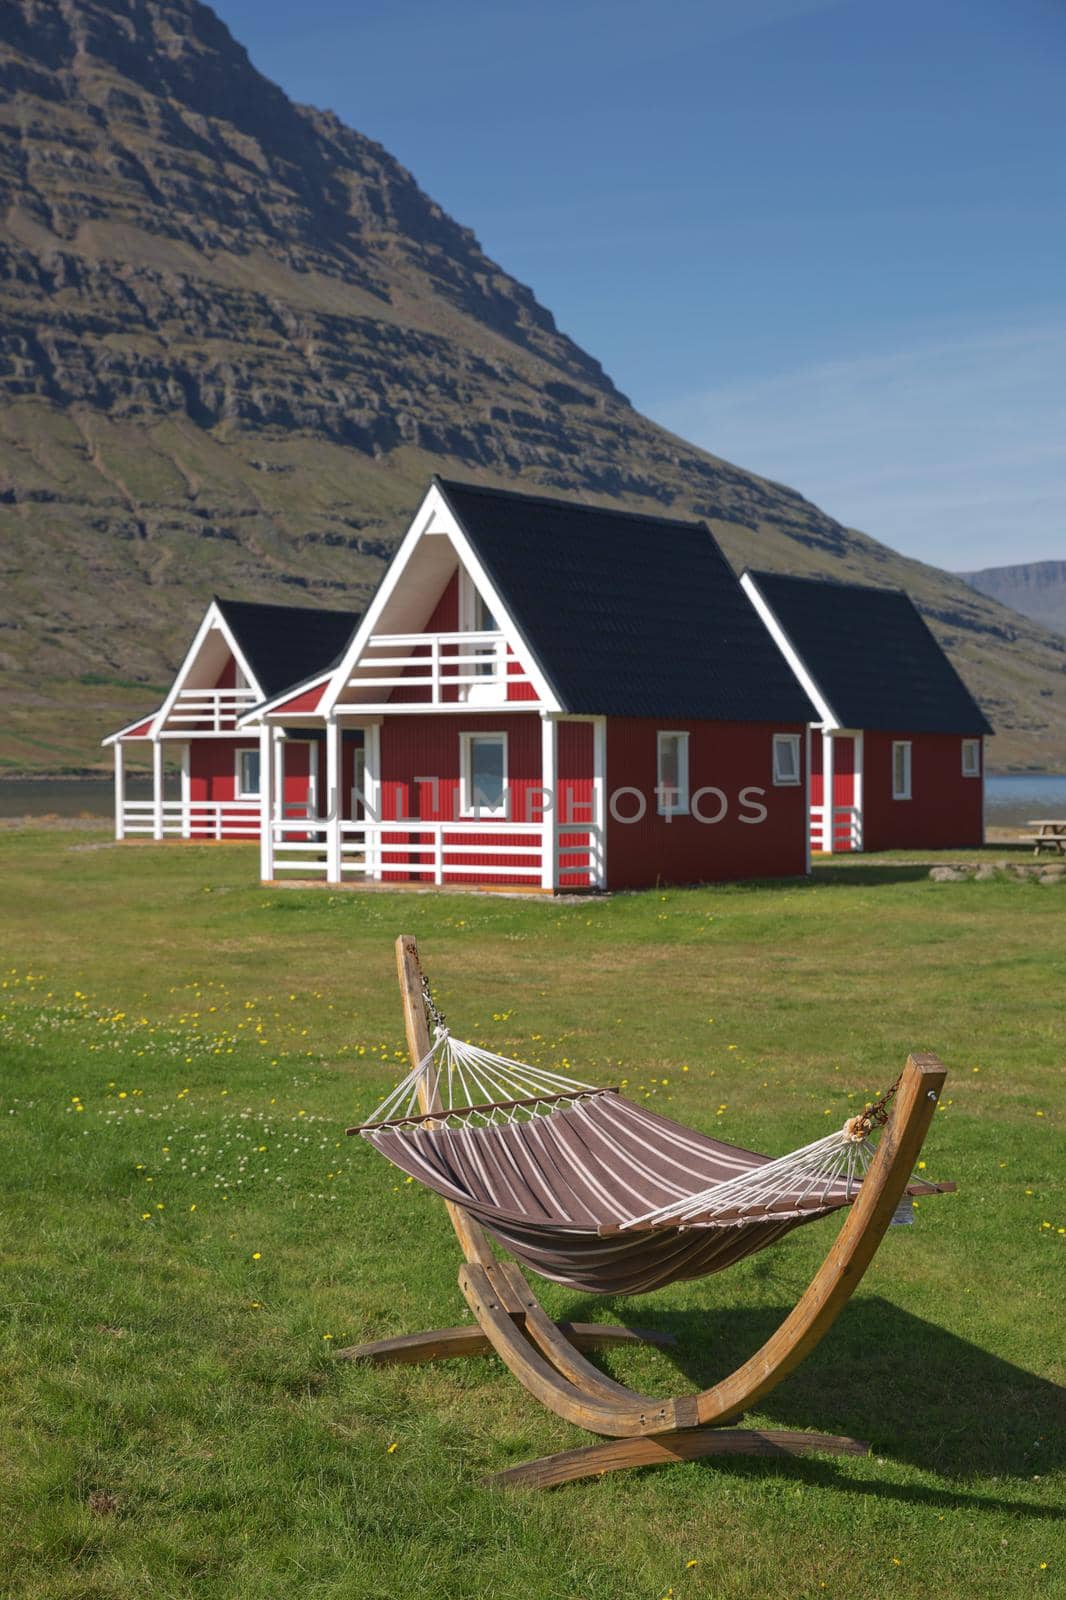 Traditional red painted wooden panel house with mighty Holmatindur mountain in the background in Eskifjordur, East Iceland.